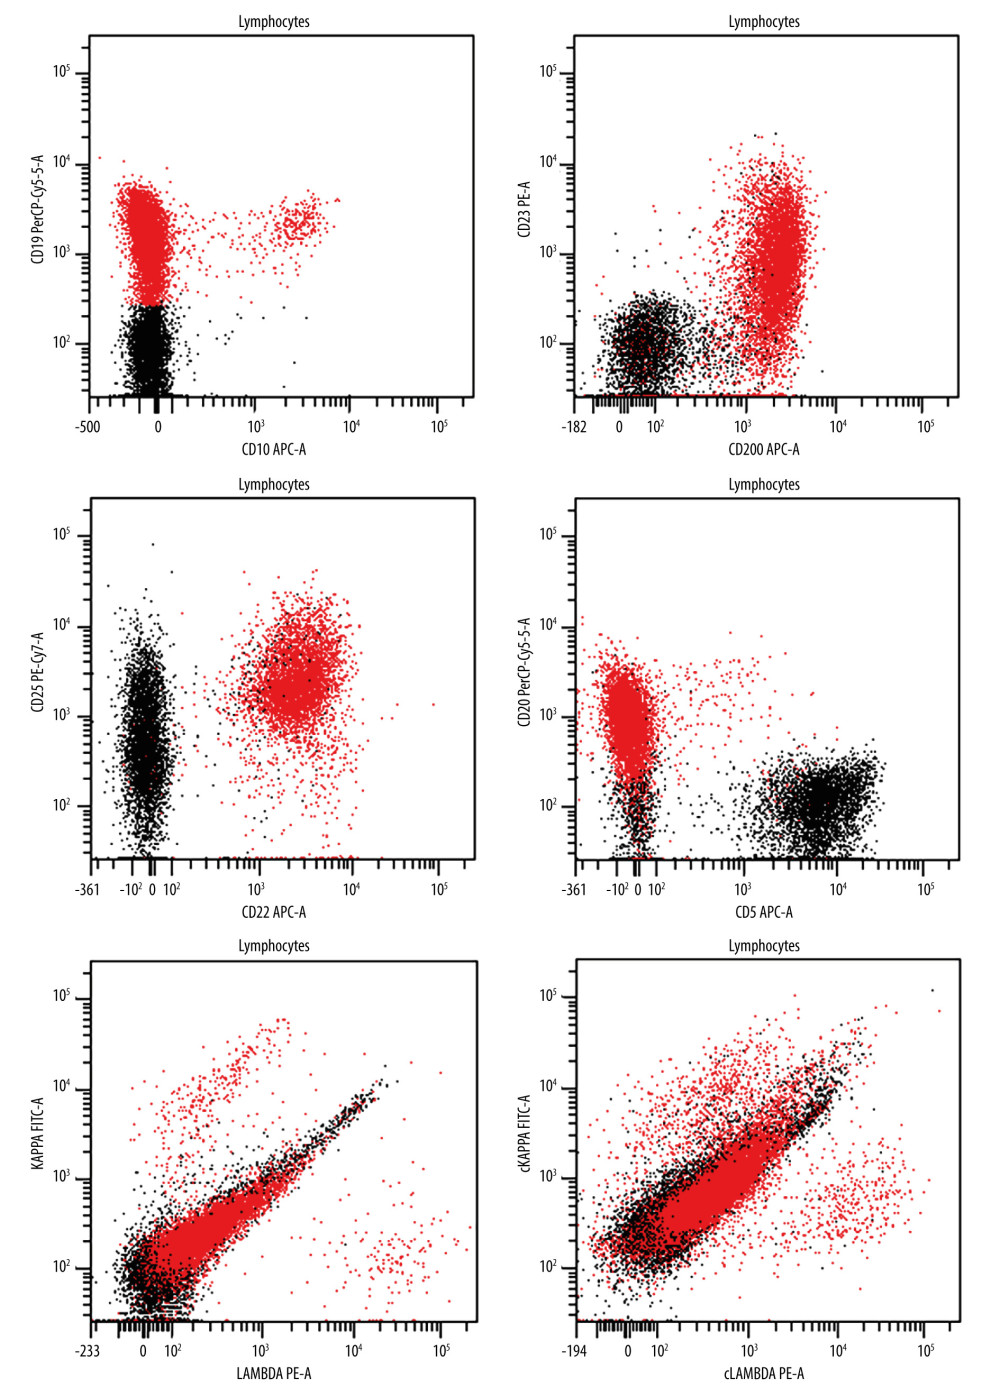 Flow cytometry analysis of the B lymphocytes. The lymphocytes are gated as follows: red, B cells; black, T cells. Most B cells lack light chain expression, with a minor subset of normal B cells demonstrating a polytypic light chain expression.